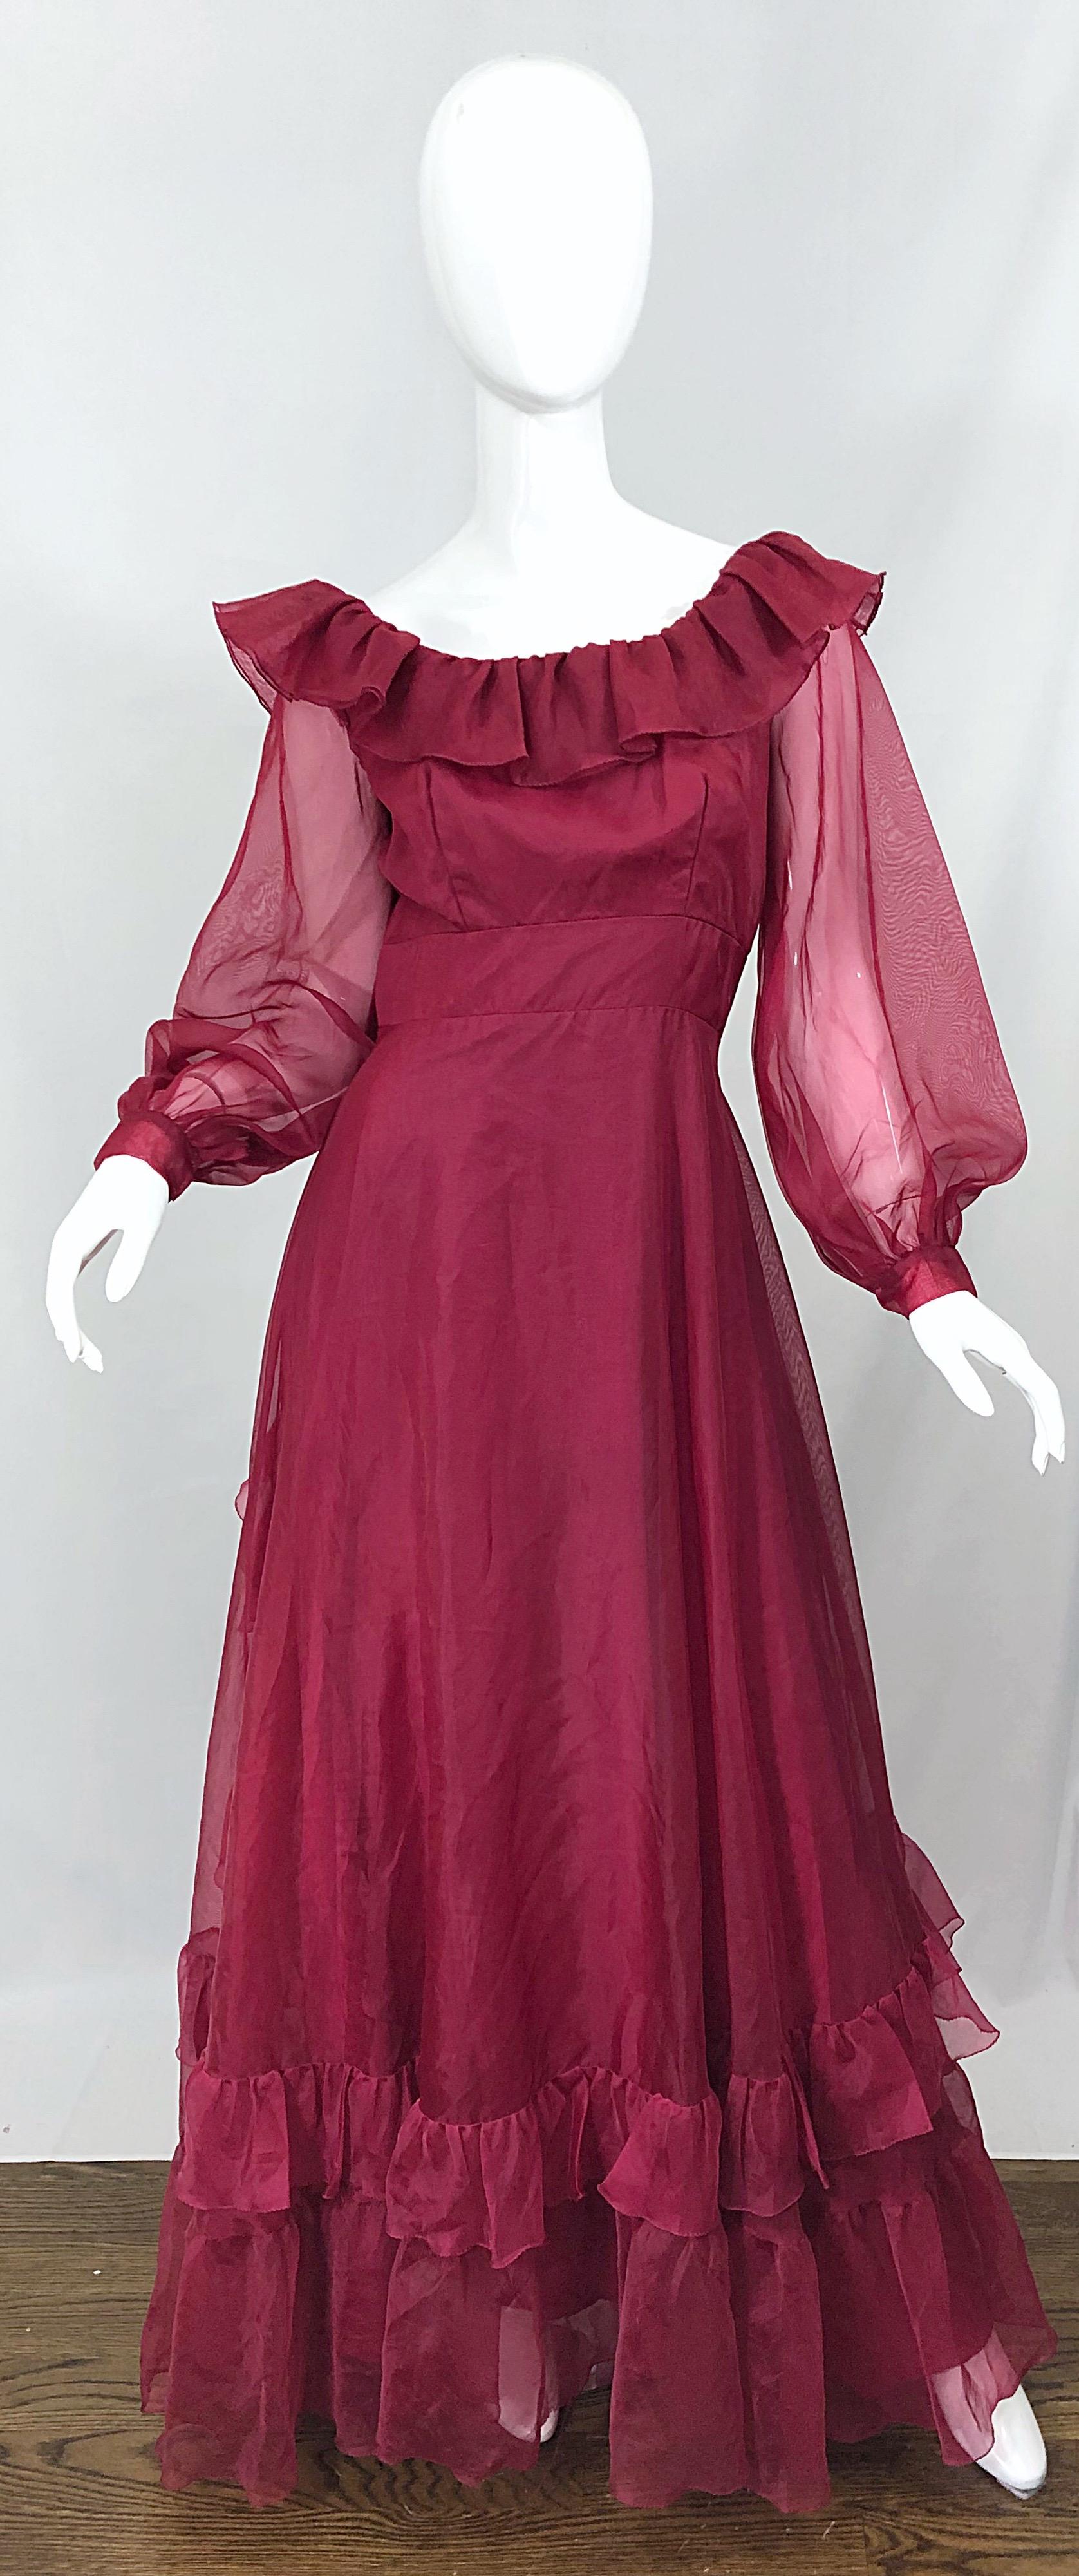 Fantastic mid 1970s burgundy ruffle maxi dress! Features intricate ruffle details on the front and back. Hidden metal zipper up the back with hook-and-eye closure. Great with sandals or wedges for a day event, or heels for evening. In great